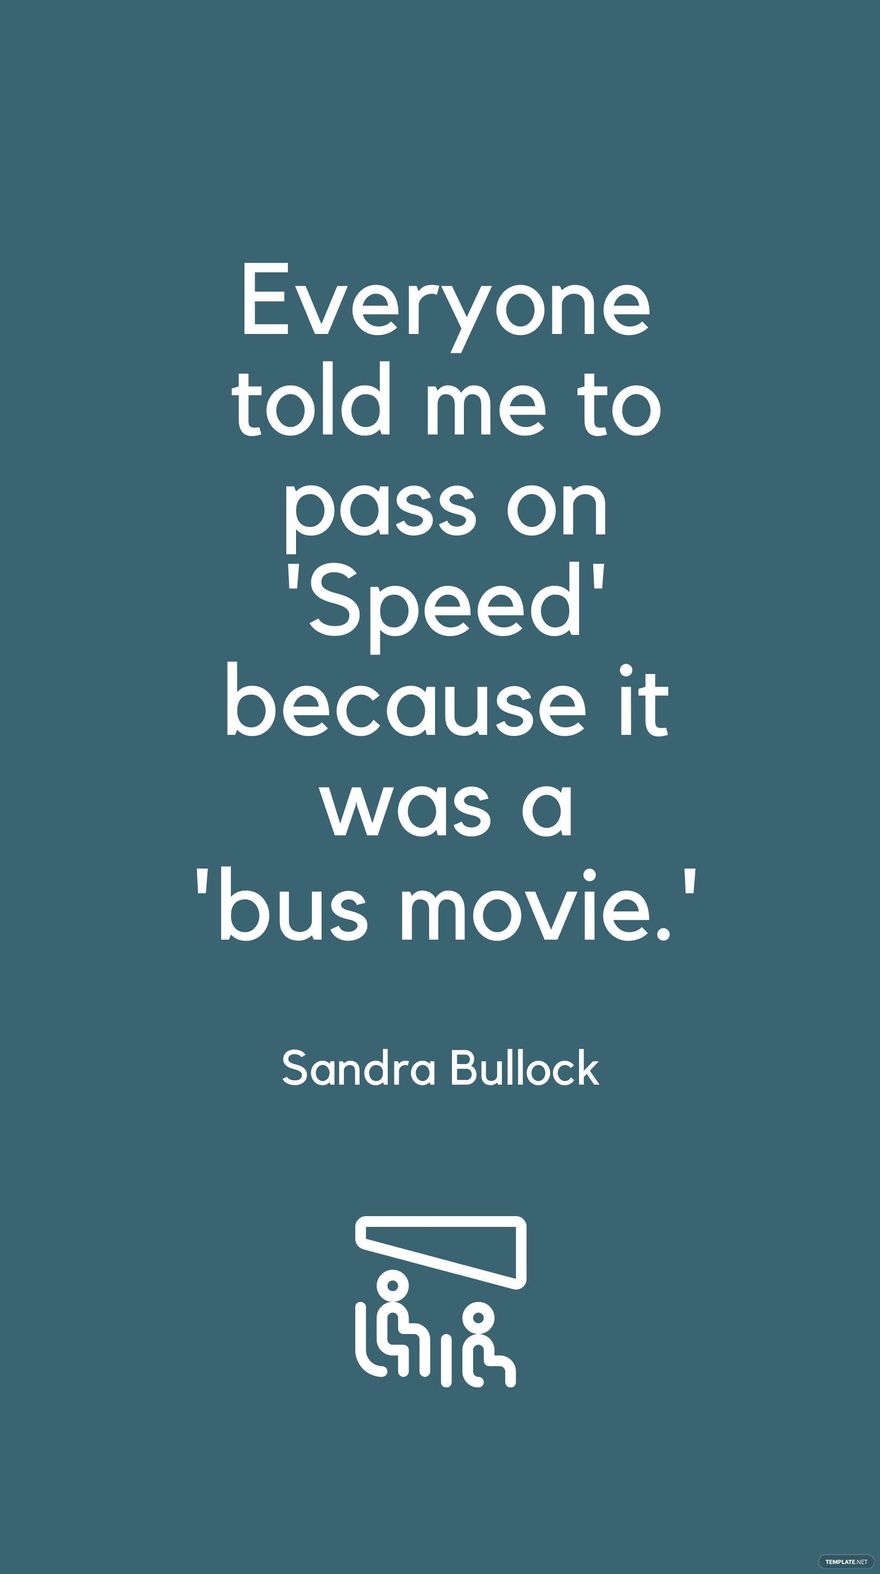 Free Sandra Bullock - Everyone told me to pass on 'Speed' because it was a 'bus movie. in JPG